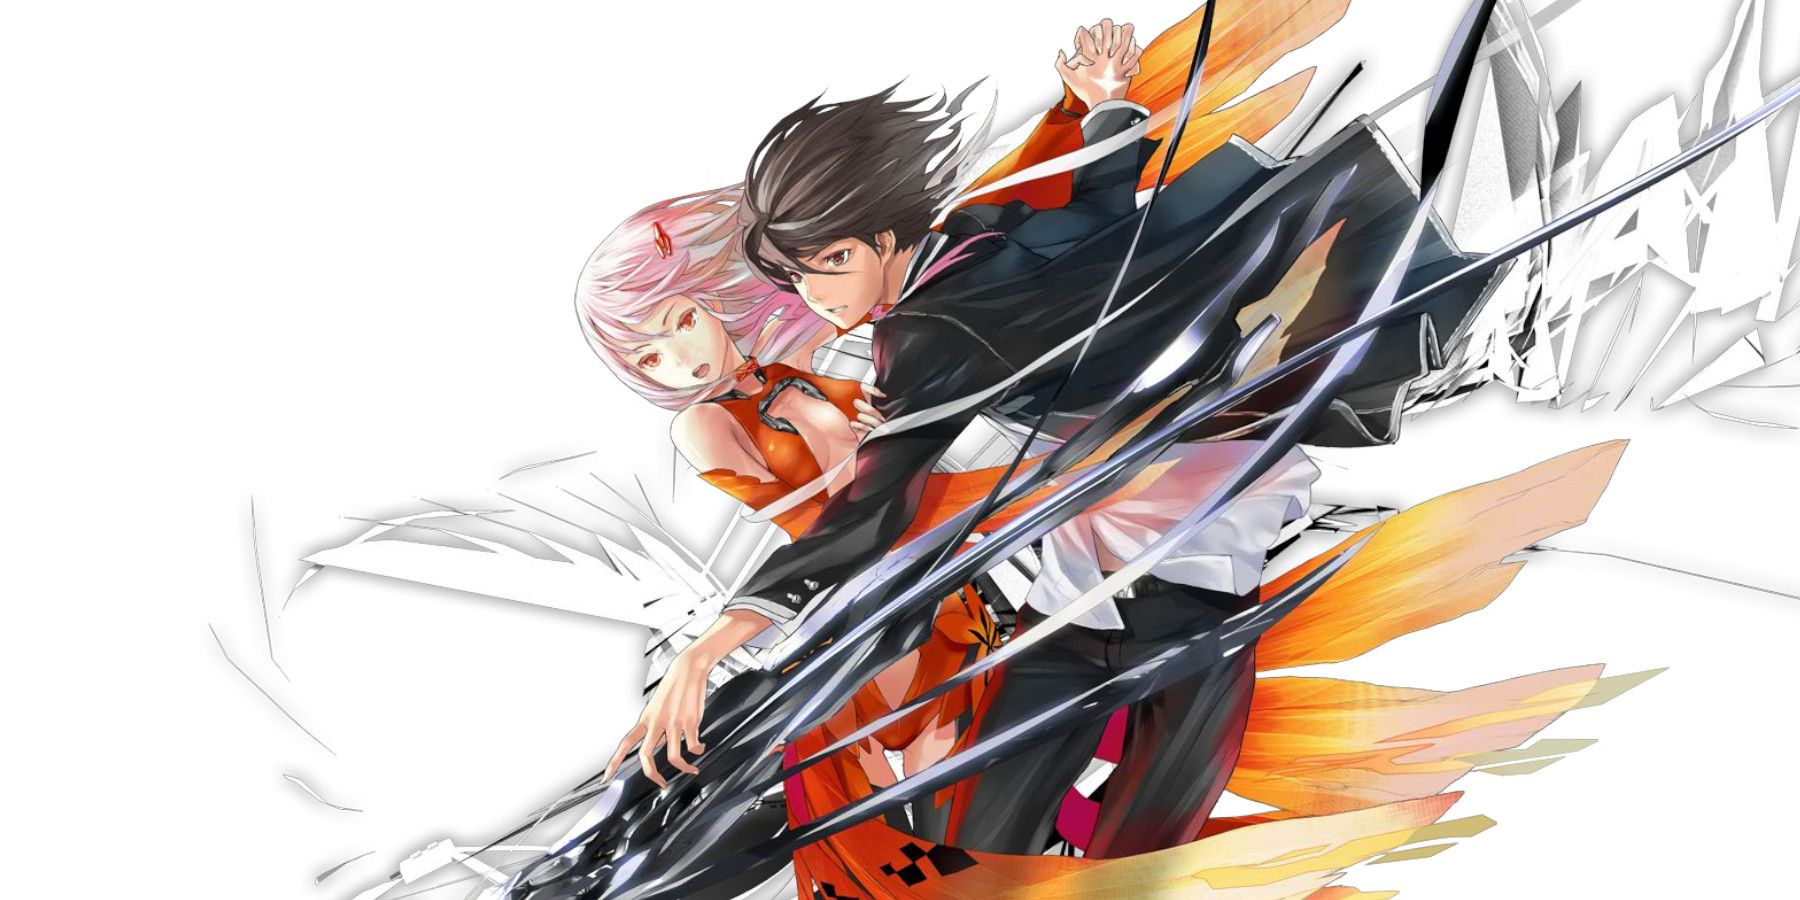 Guilty Crown: Lost Christmas (PC)